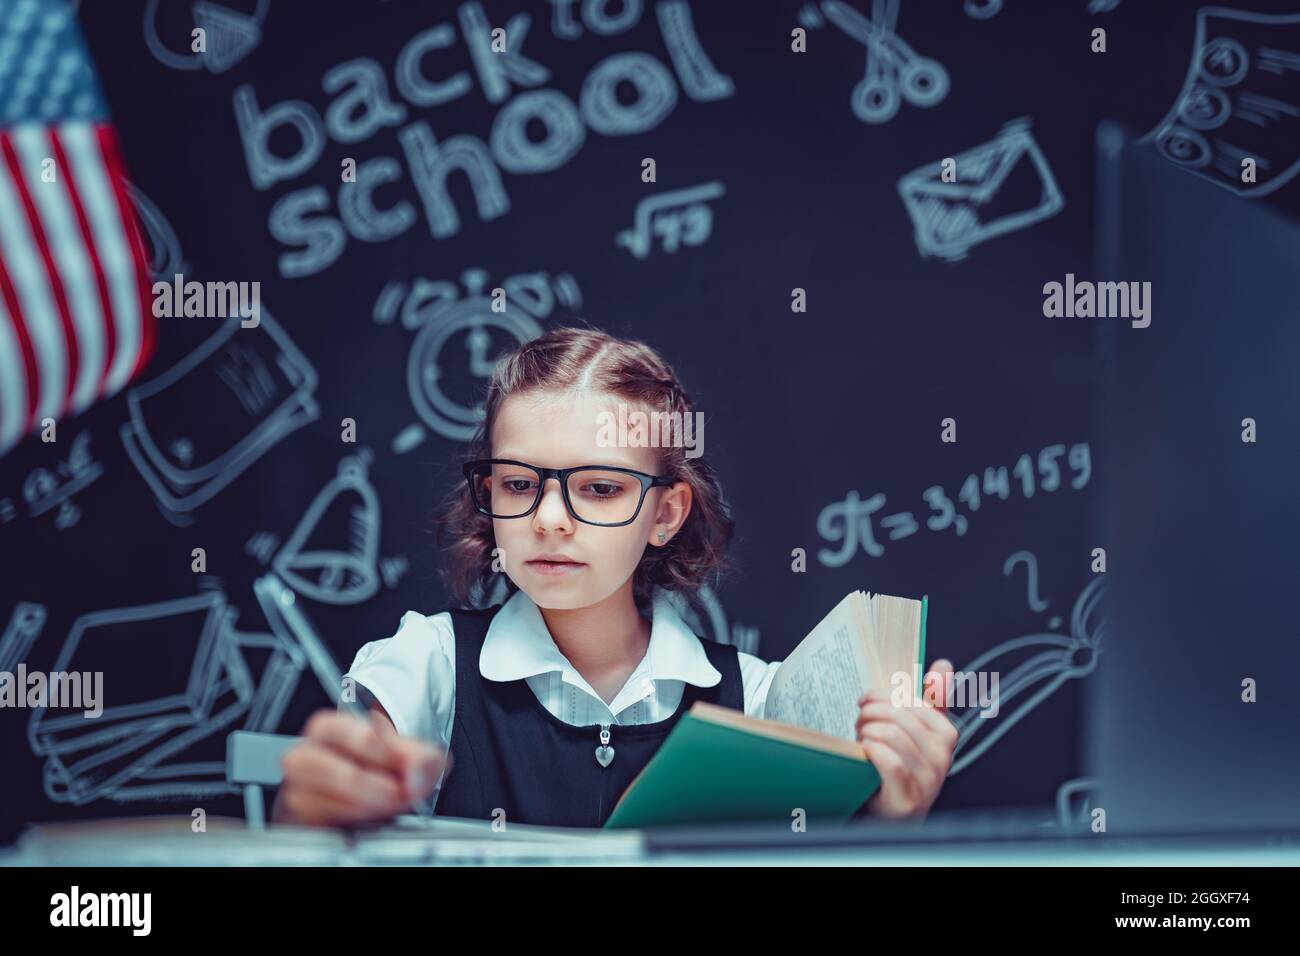 beautiful little schoolgirl sitting at desk and study online with laptop against black background with USA flag Stock Photo